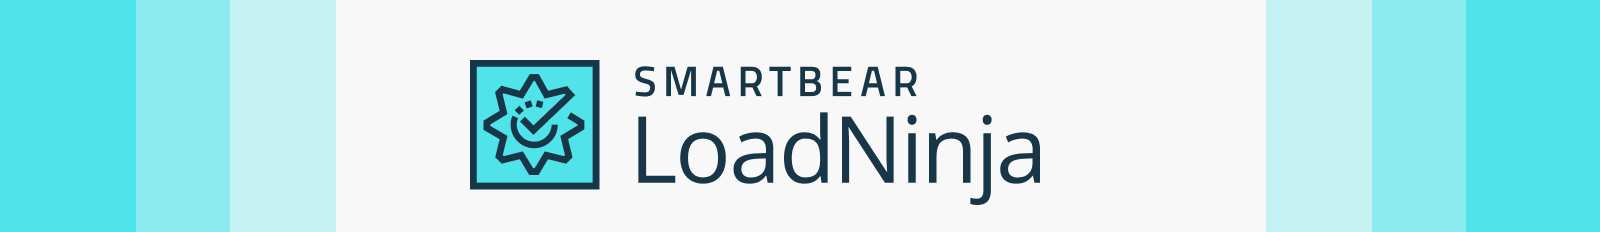 LoadNinja by SmartBear as one of the best website testing tools on the market